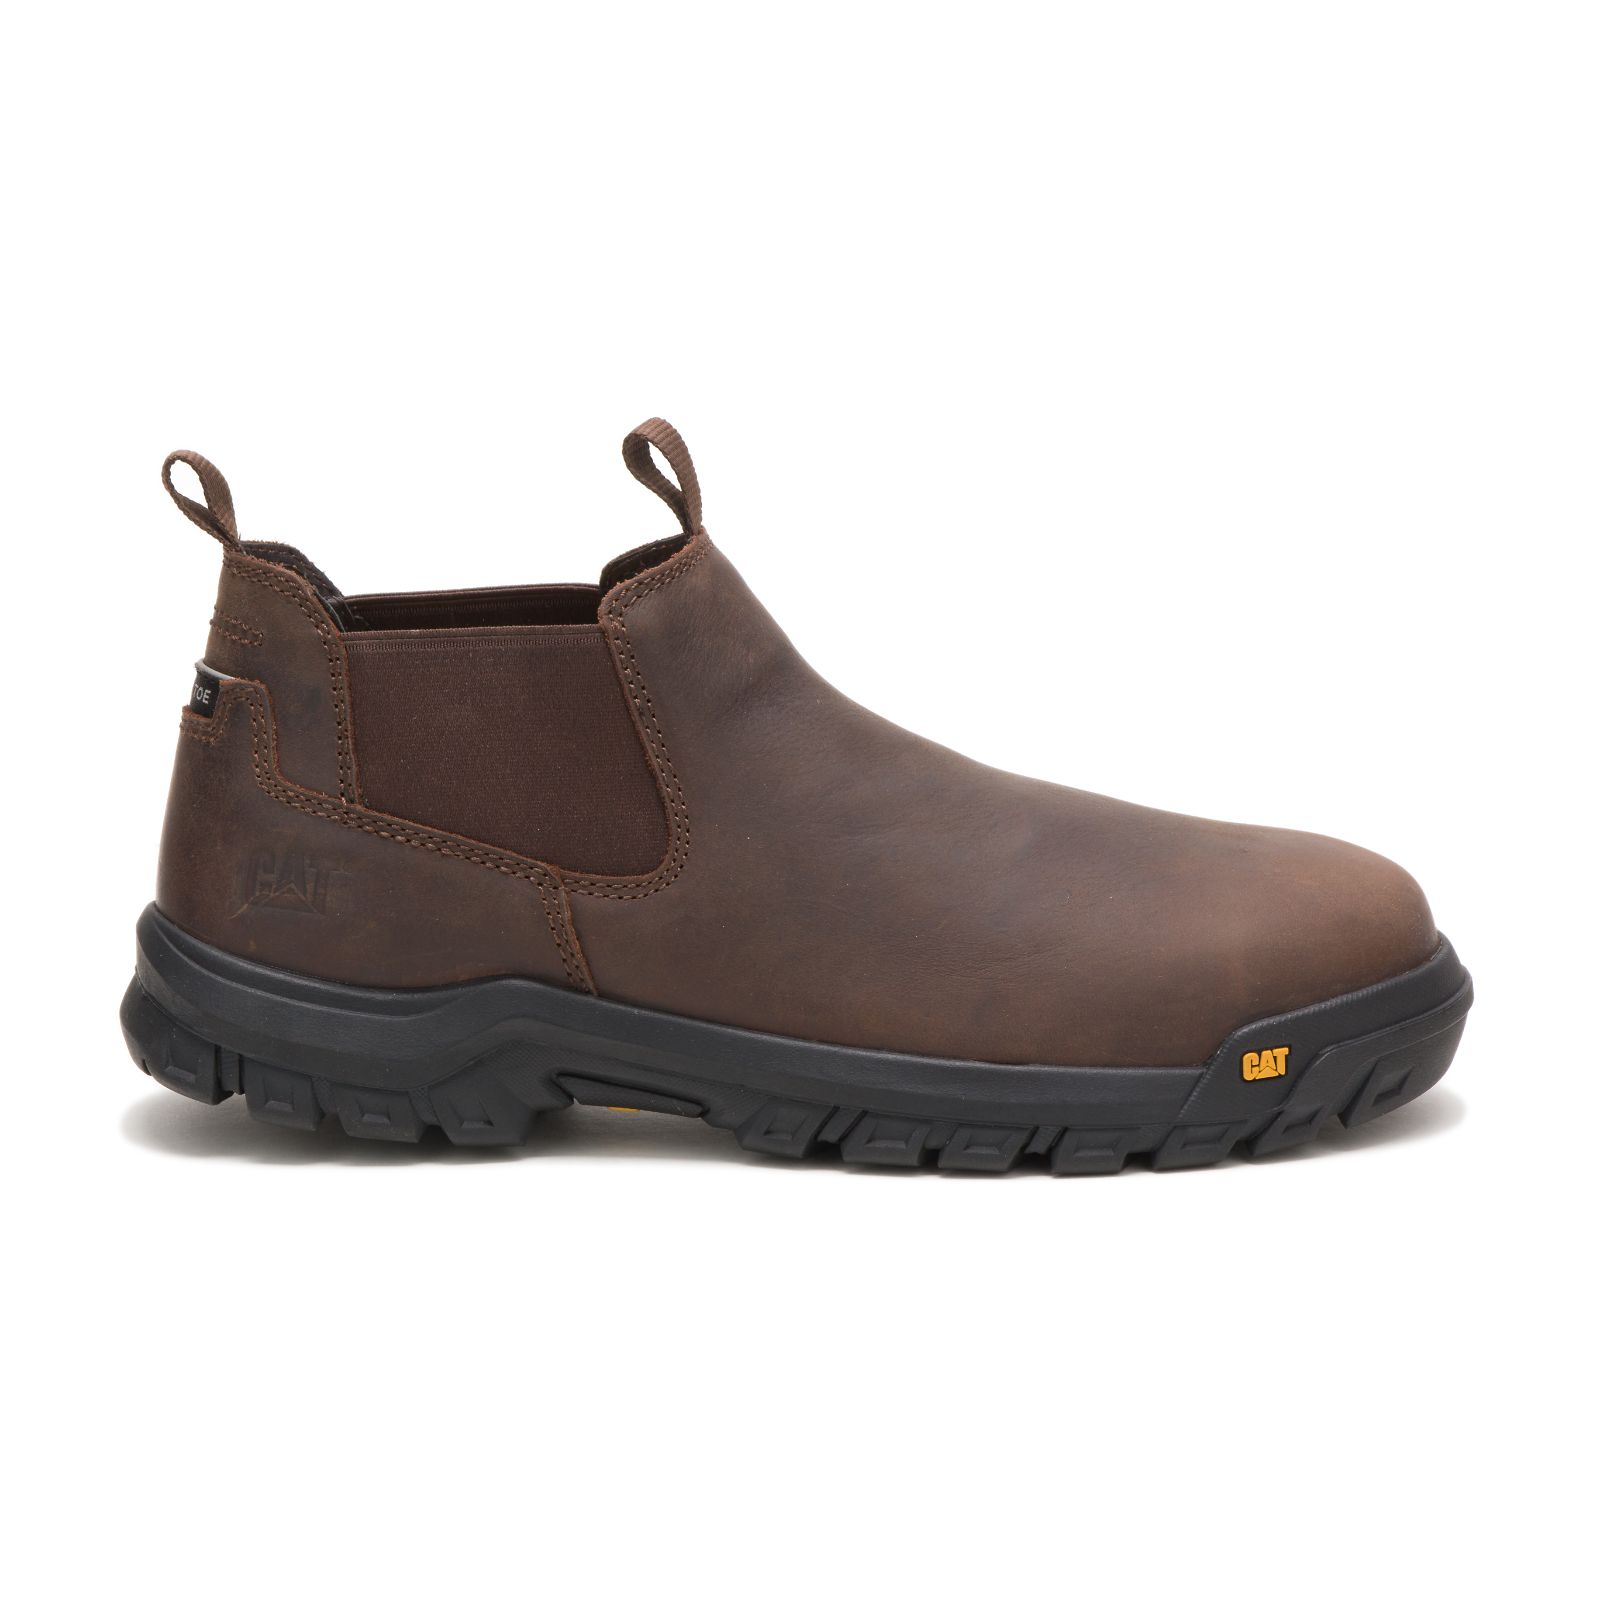 Caterpillar Boots Islamabad - Caterpillar Outline Slip-on Steel Toe Mens Work Boots Brown (759382-GXD)